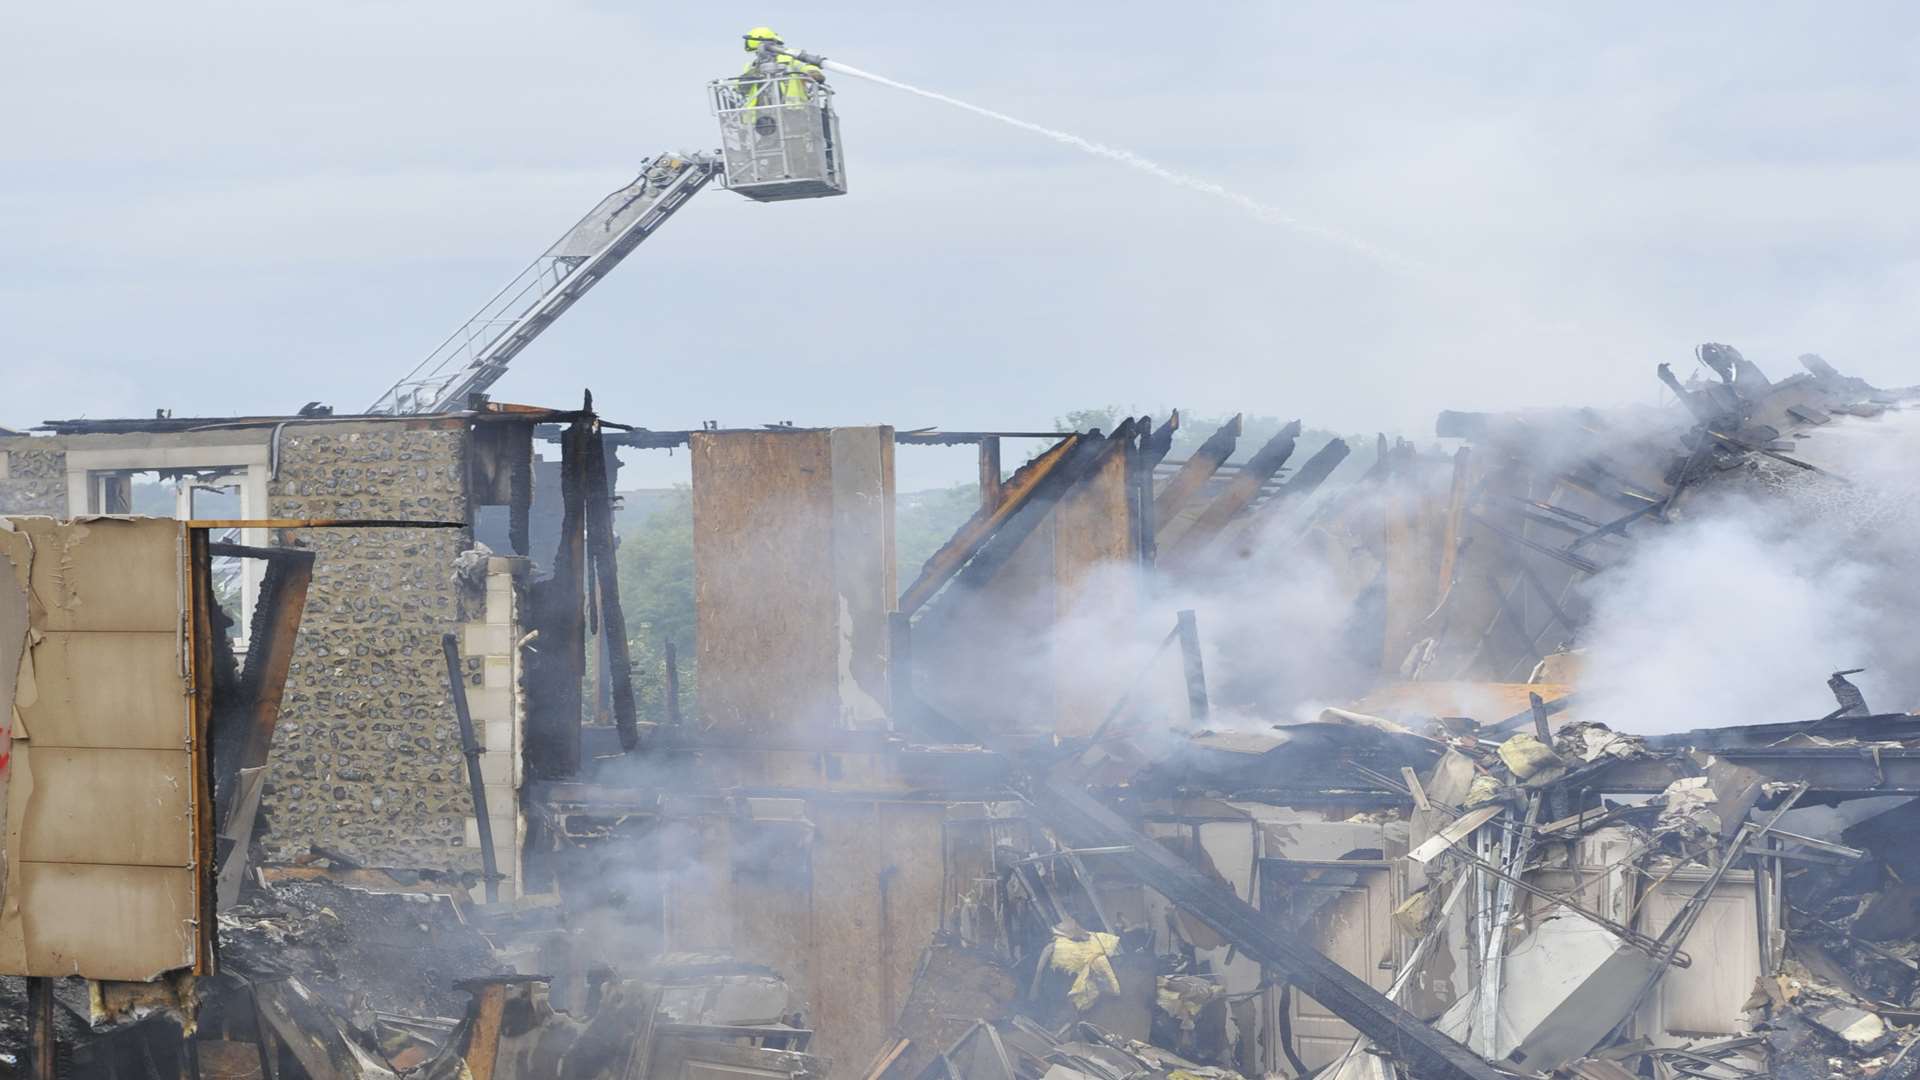 Homes were destroyed and possessions lost in the blaze. Picture: Tony Flashman